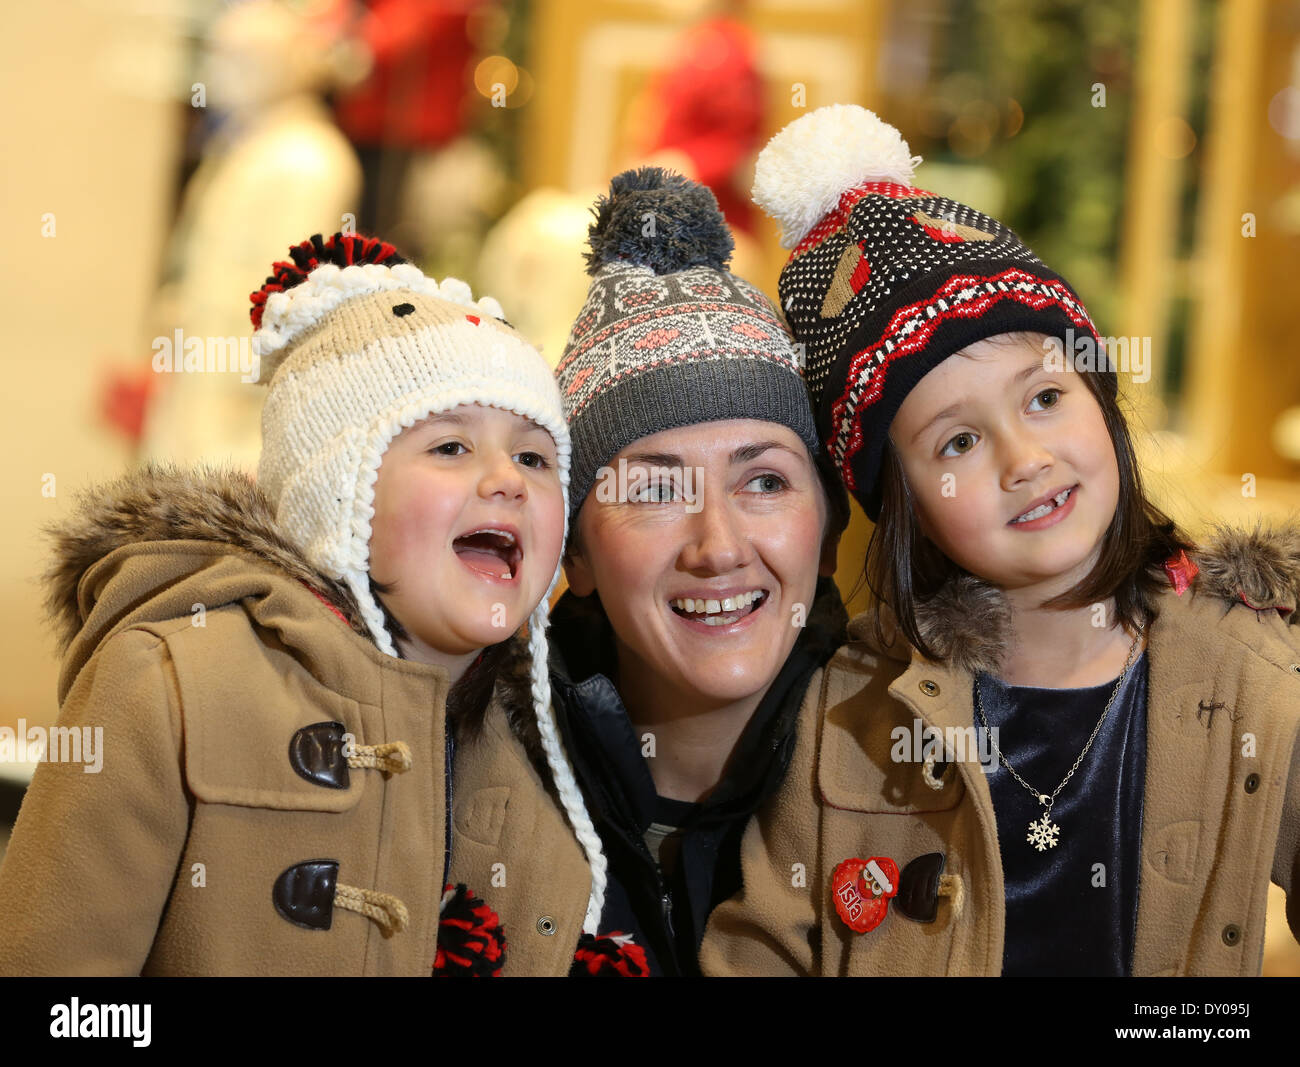 A mum and her two daughters having fun in wooly bobble hats Stock Photo